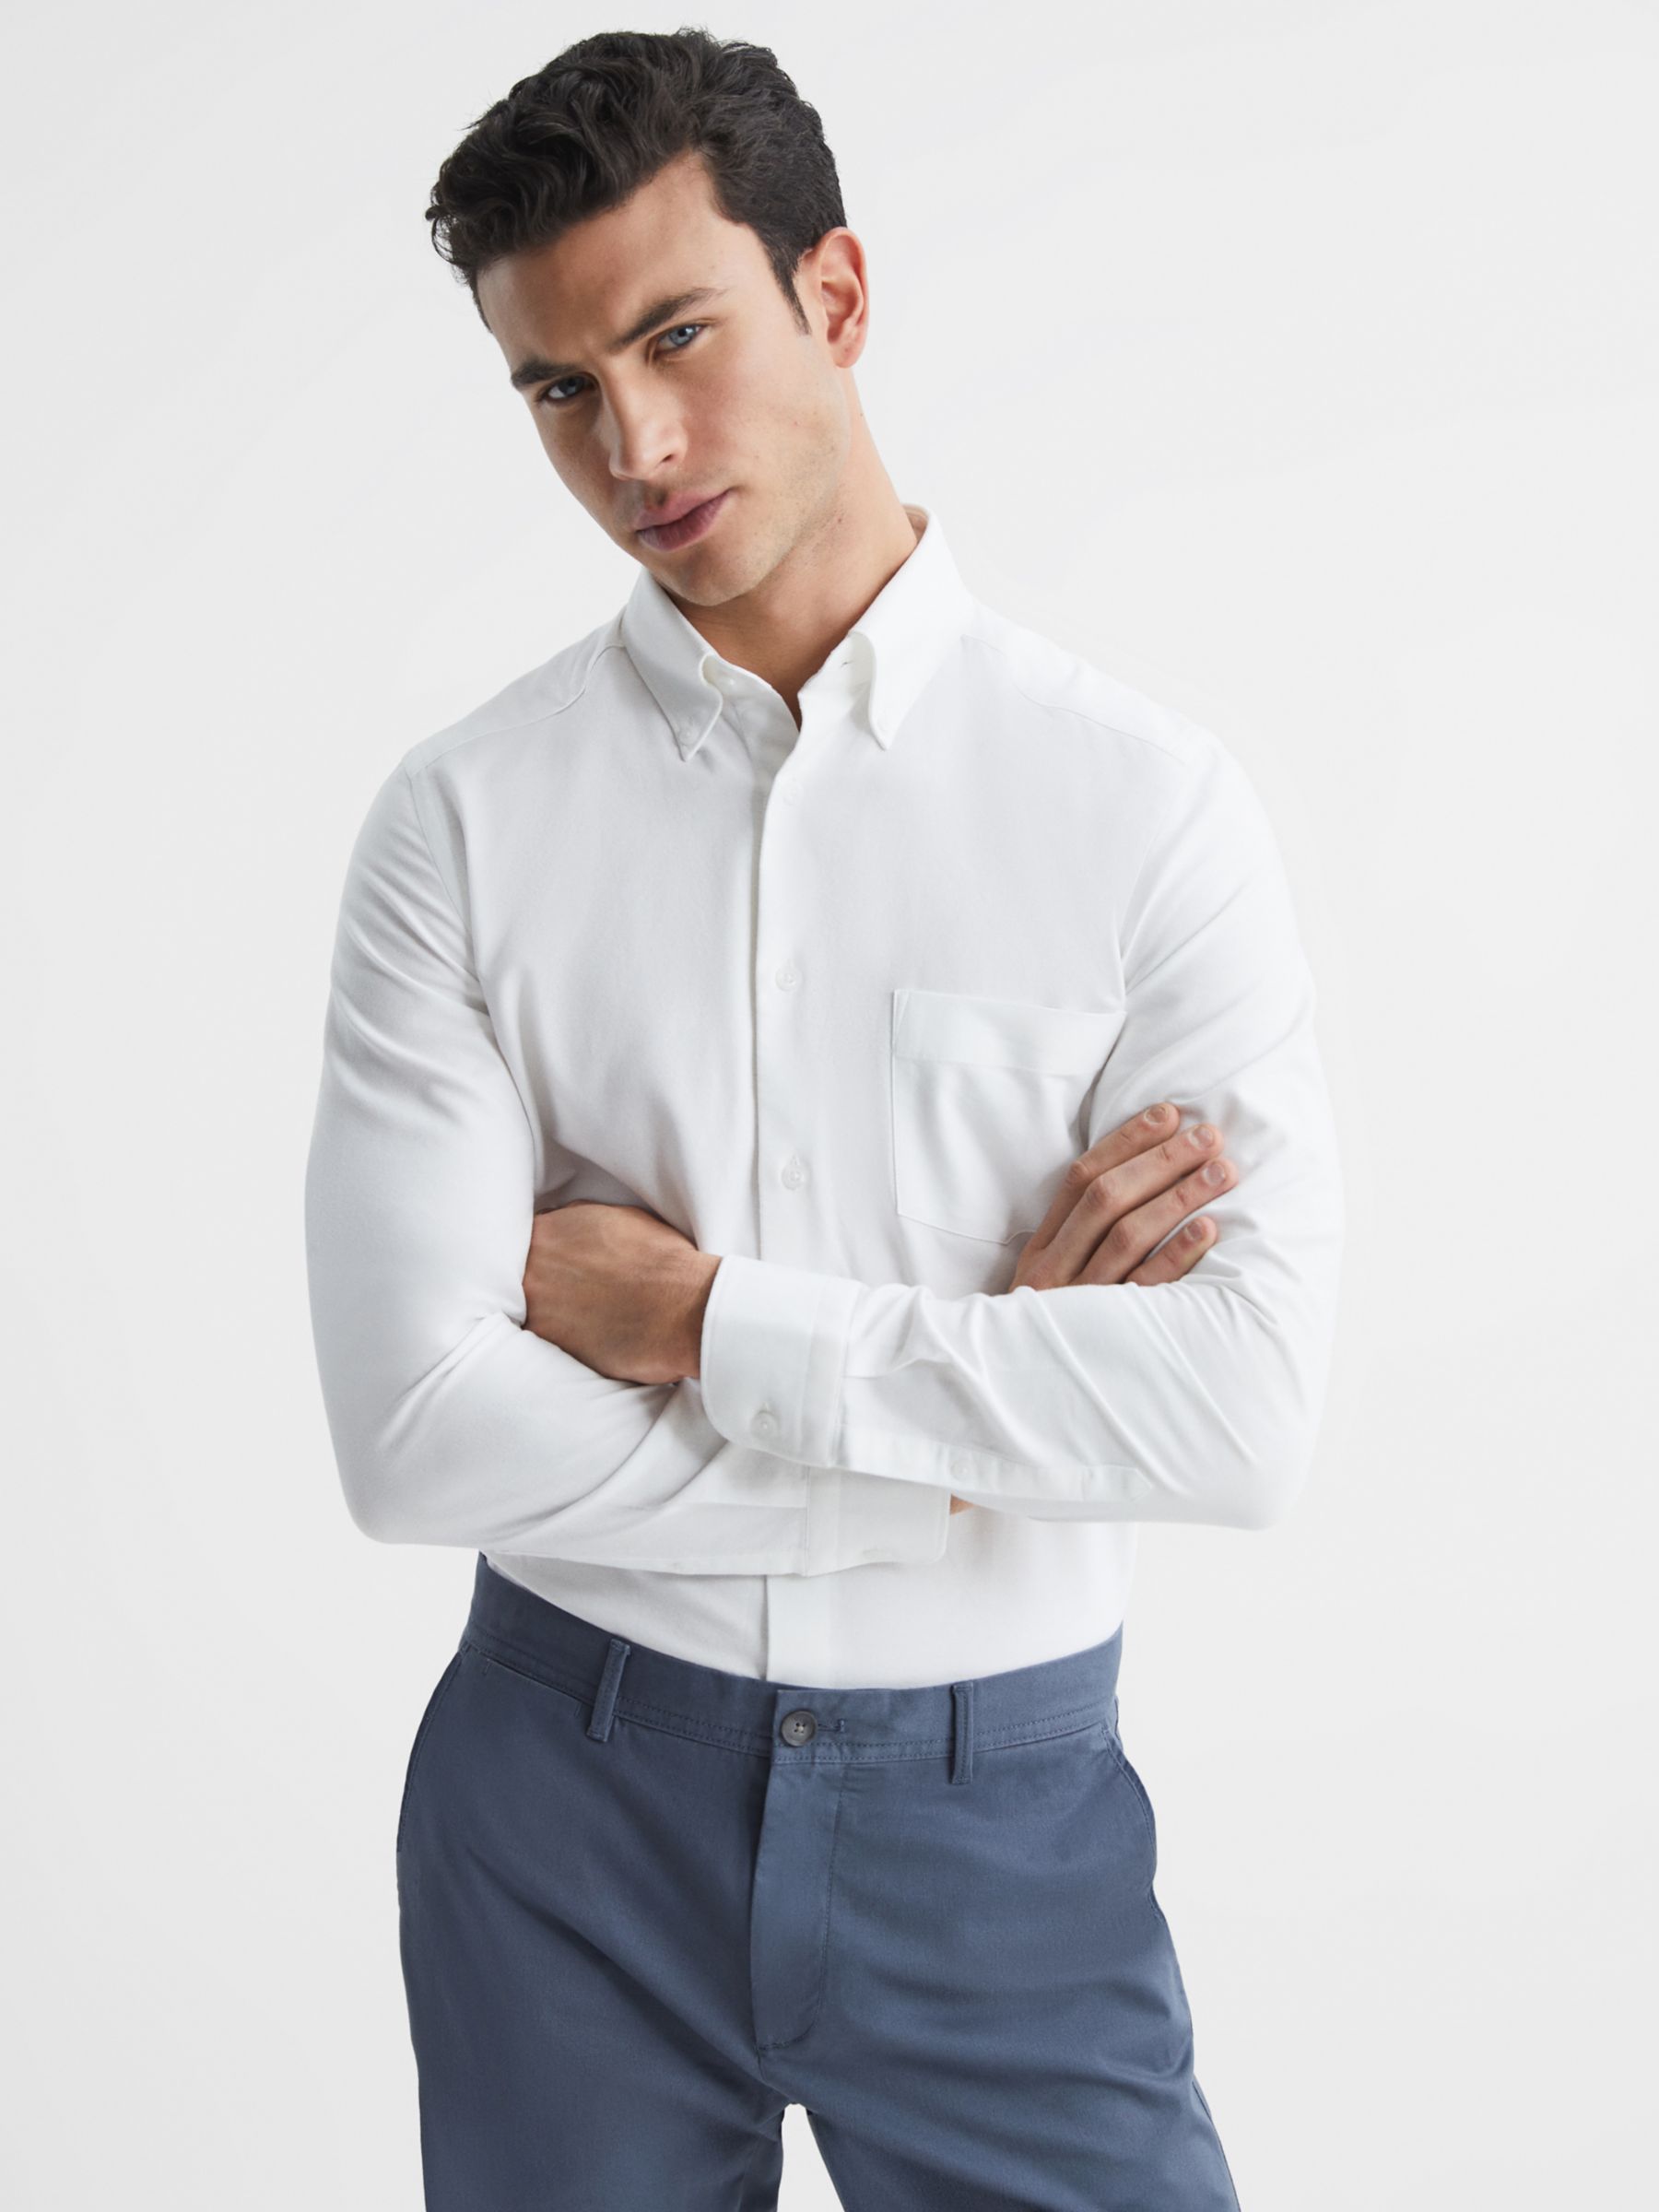 Reiss Greenwich Long Sleeve Oxford Shirt, White at John Lewis & Partners